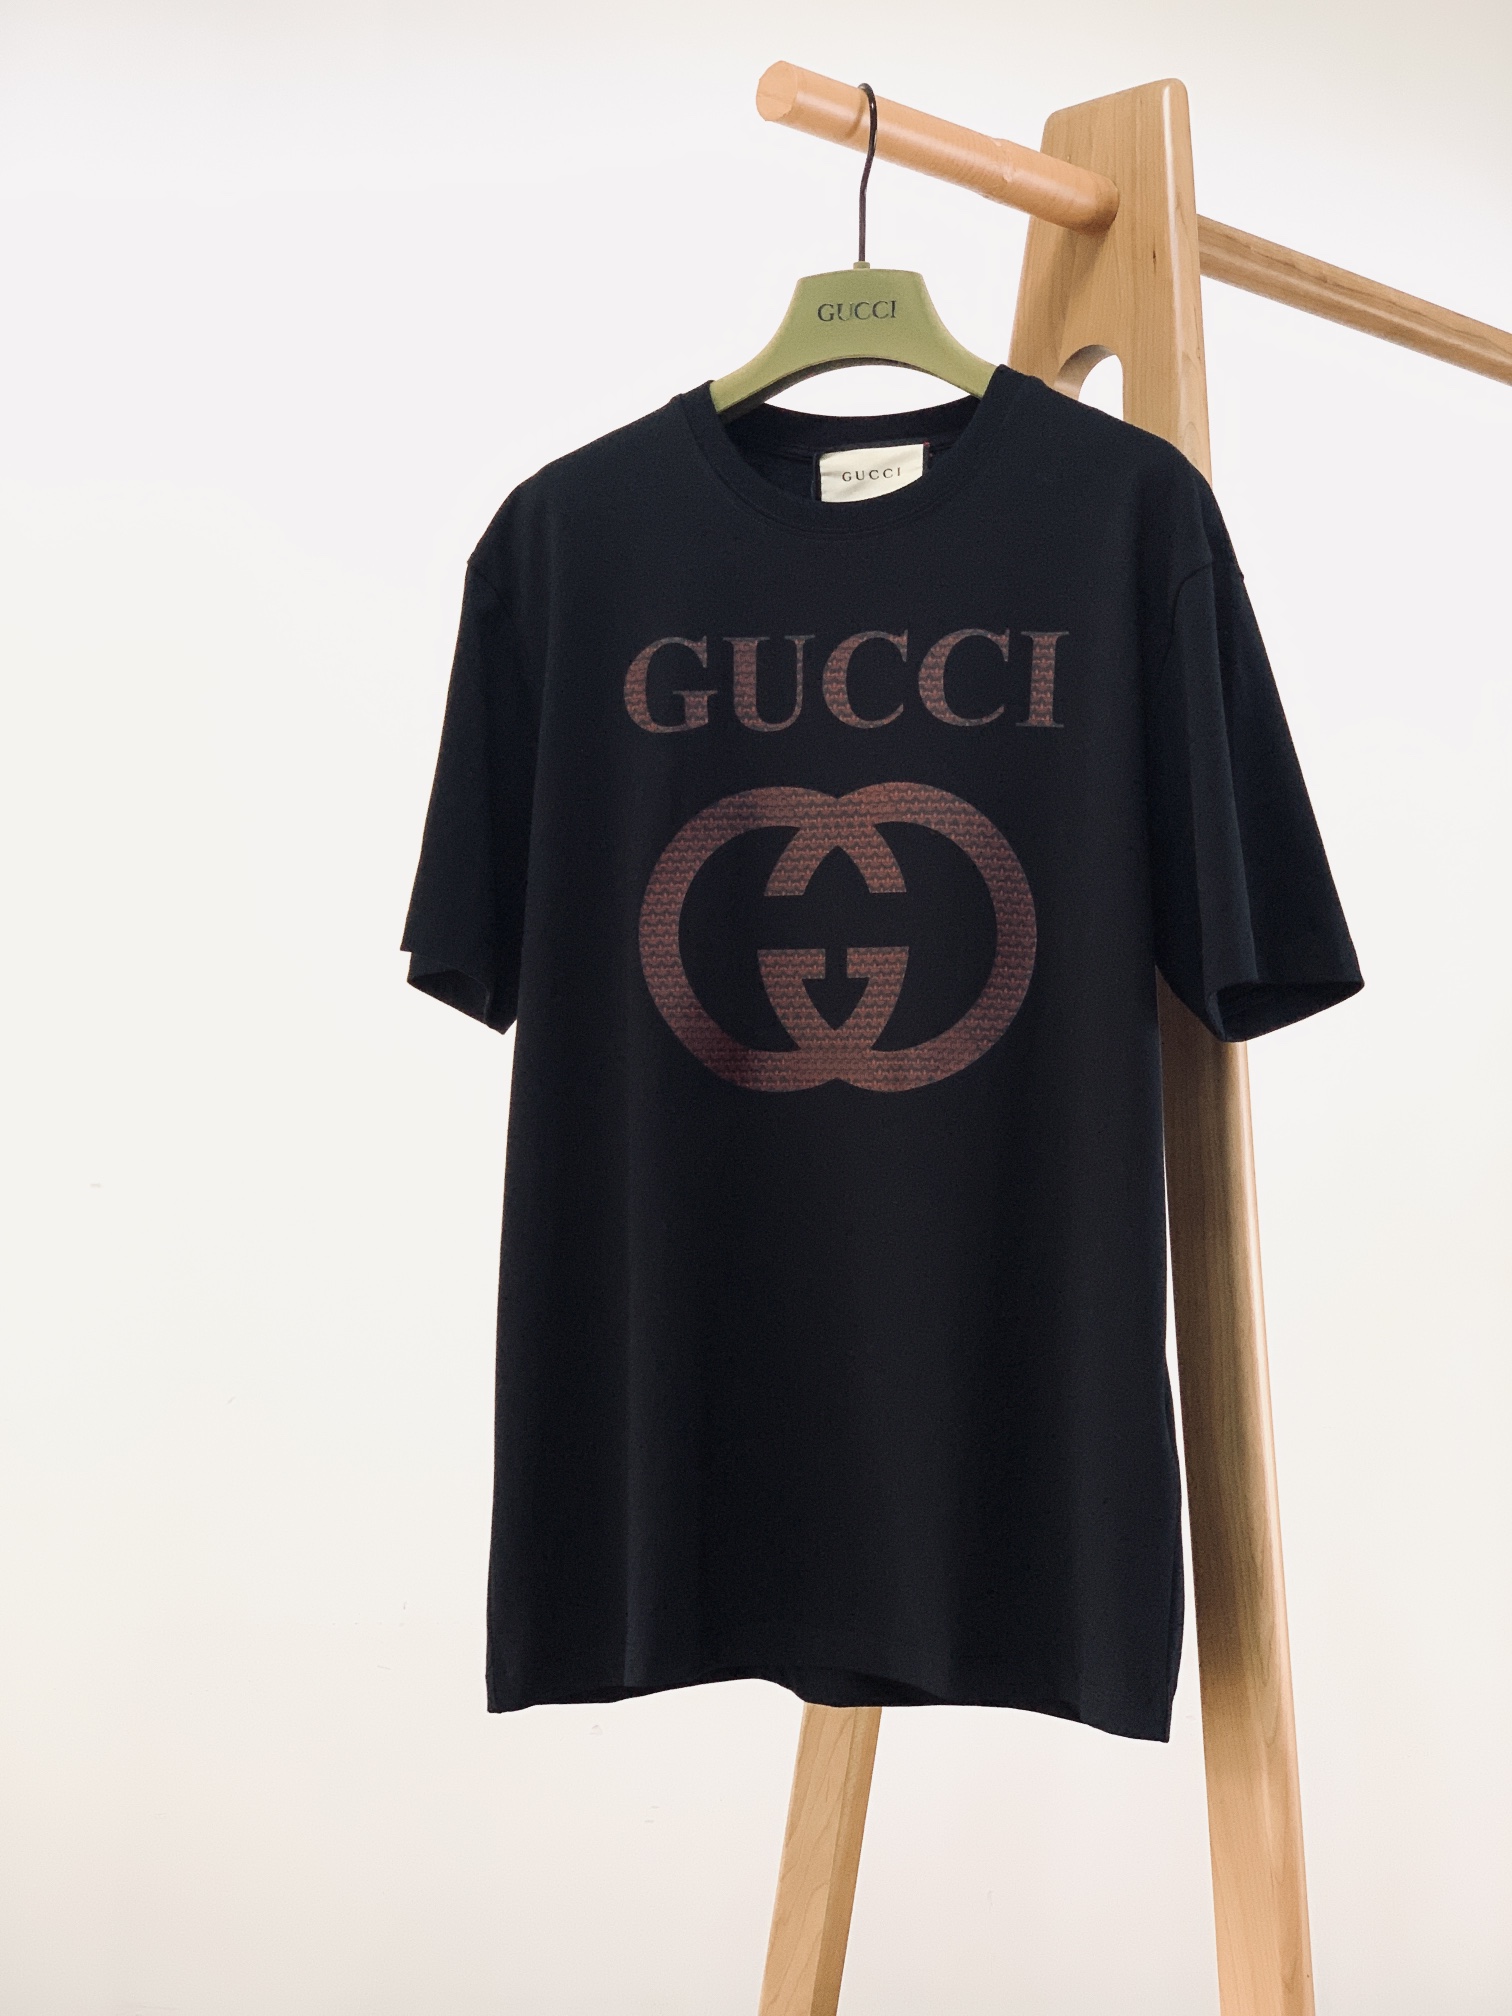 Gucci Clothing T-Shirt Printing Unisex Cotton Knitted Knitting Spring/Summer Collection Vintage Short Sleeve